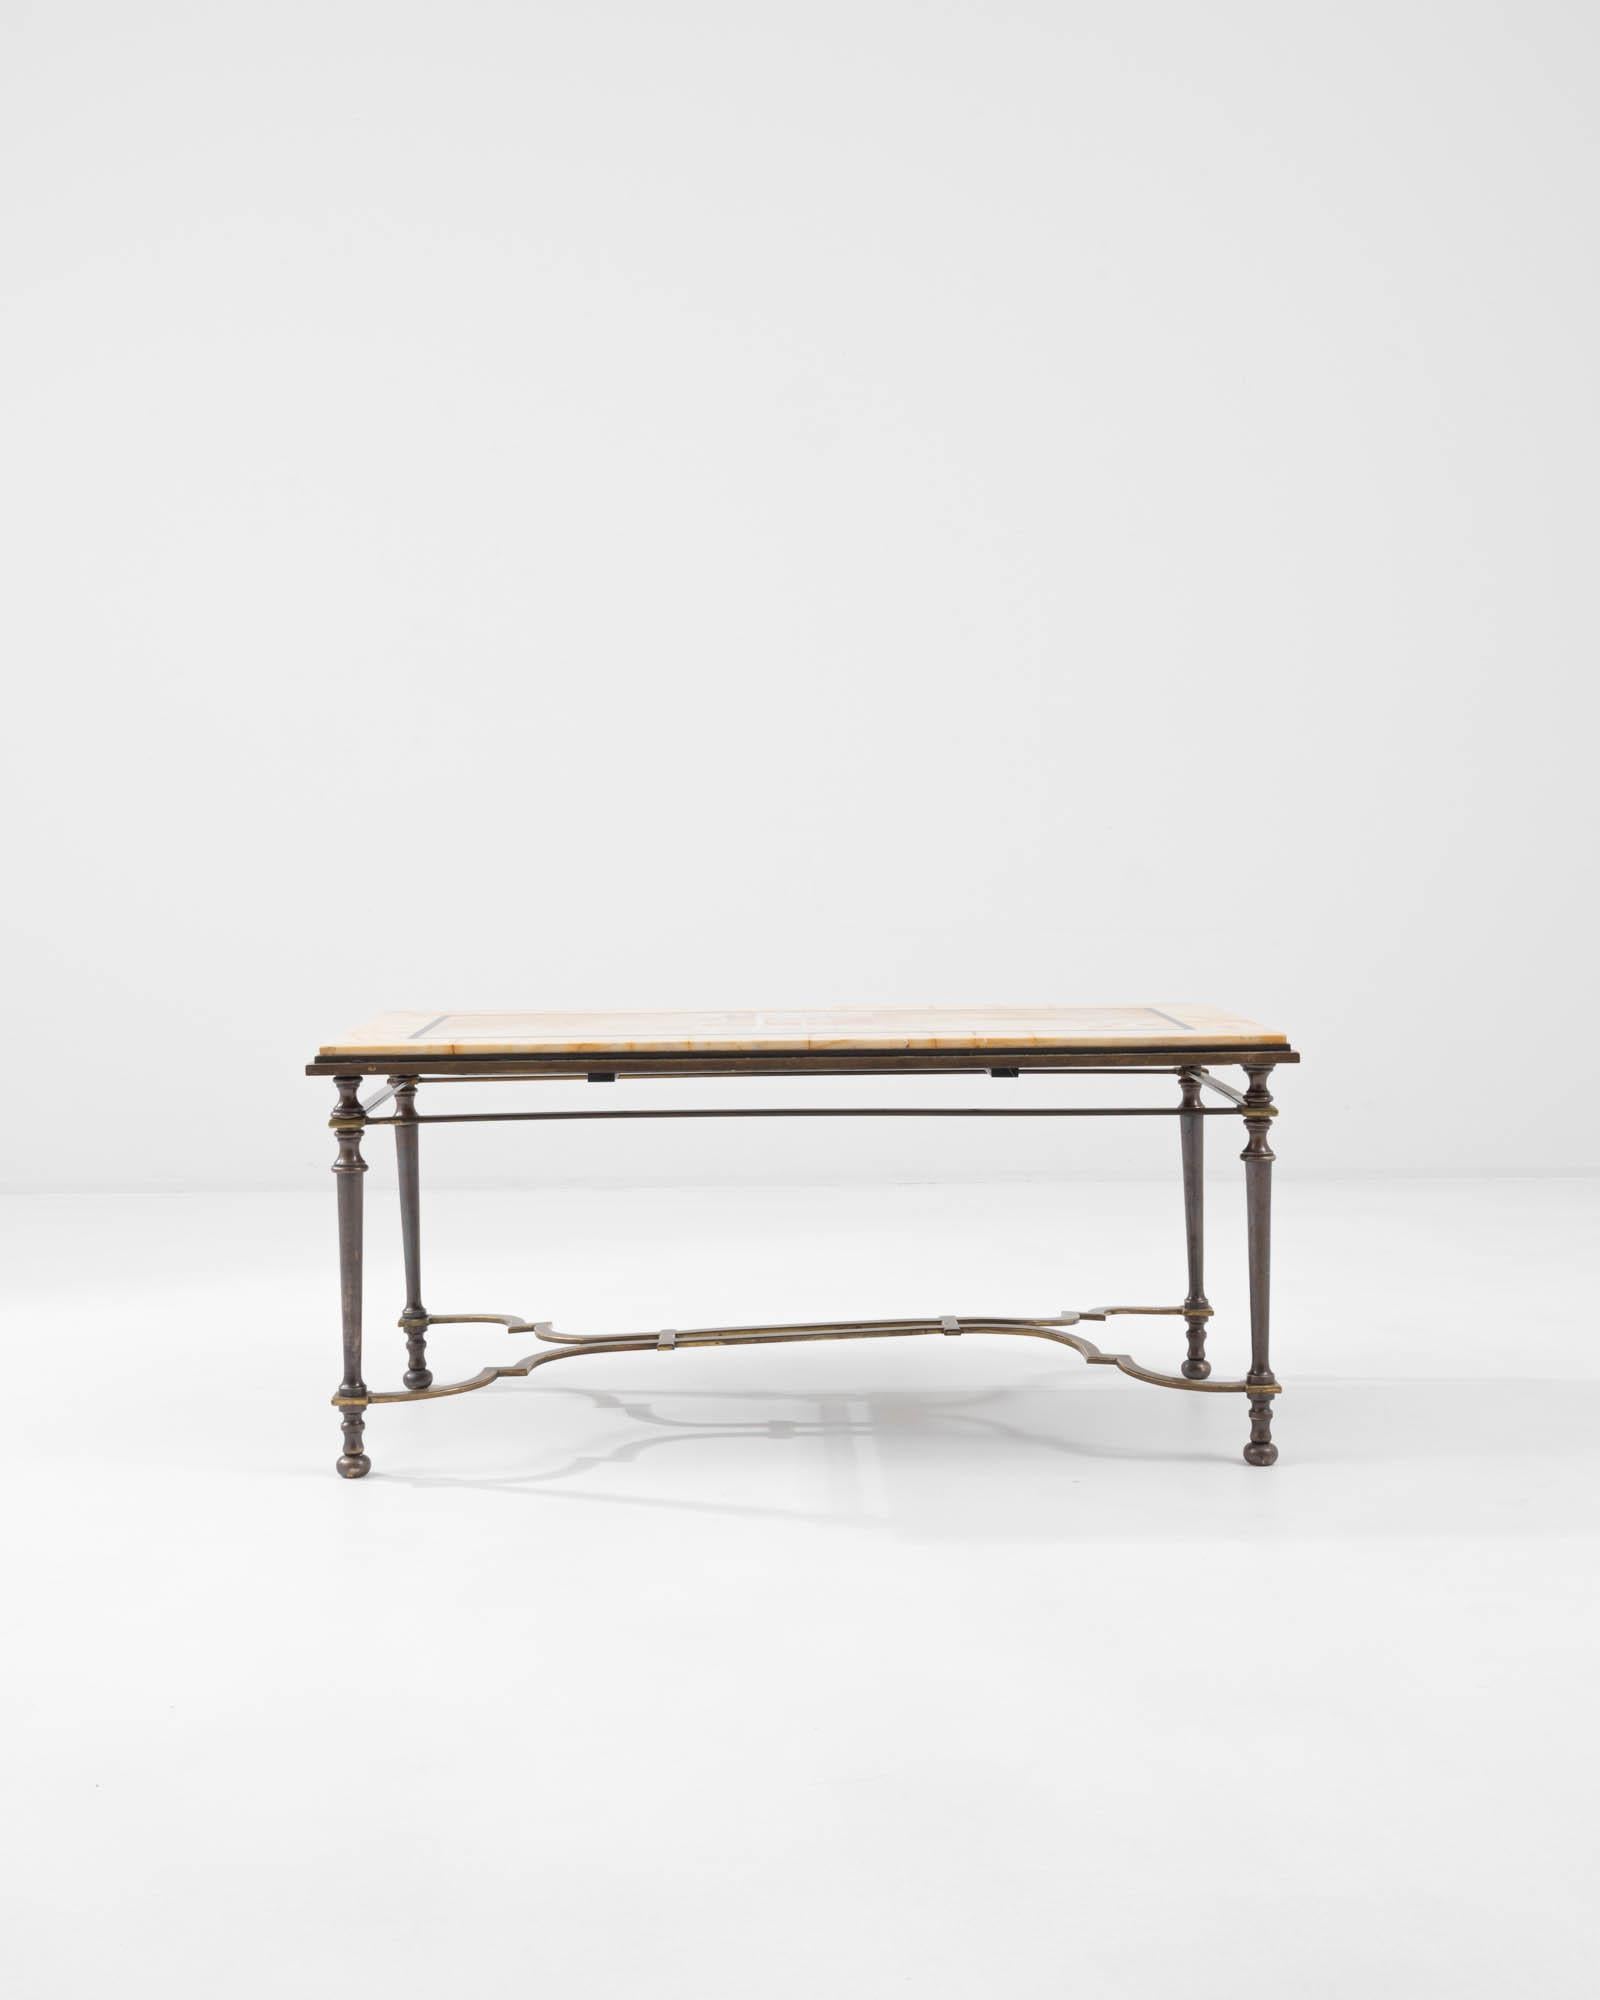 The elegant symmetries of this vintage coffee table speak to the sophistication of Belle Époque style. Made in France in the 20th century, a tabletop of pale butter-yellow marble rests atop a frame of patinated brass. The graceful lines of the